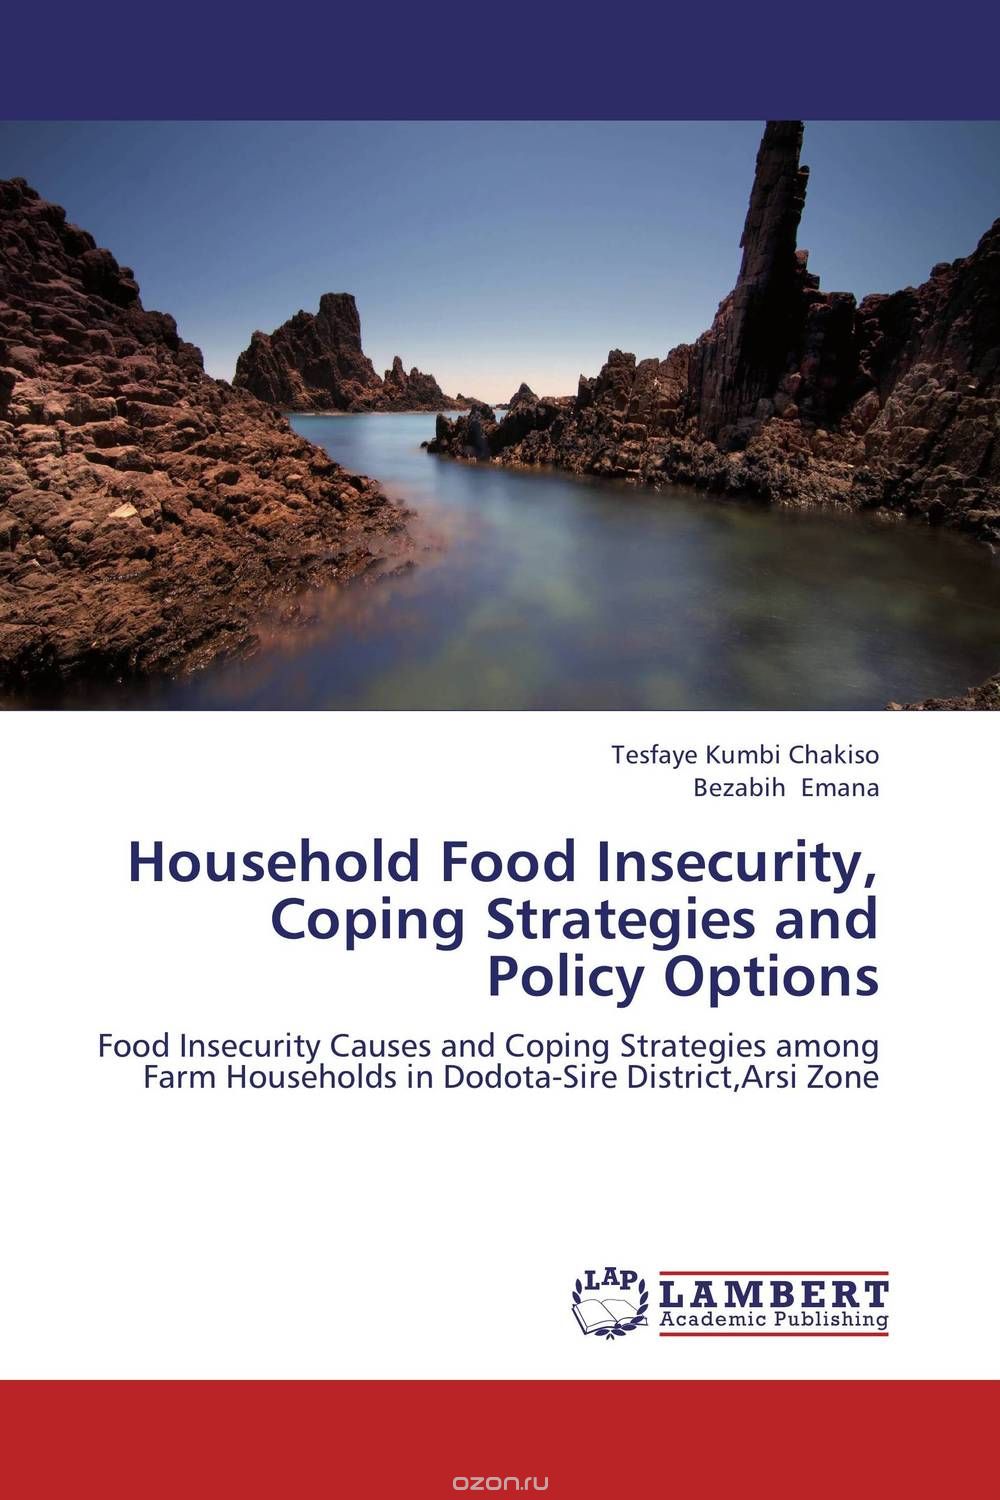 Household Food Insecurity, Coping Strategies and Policy Options